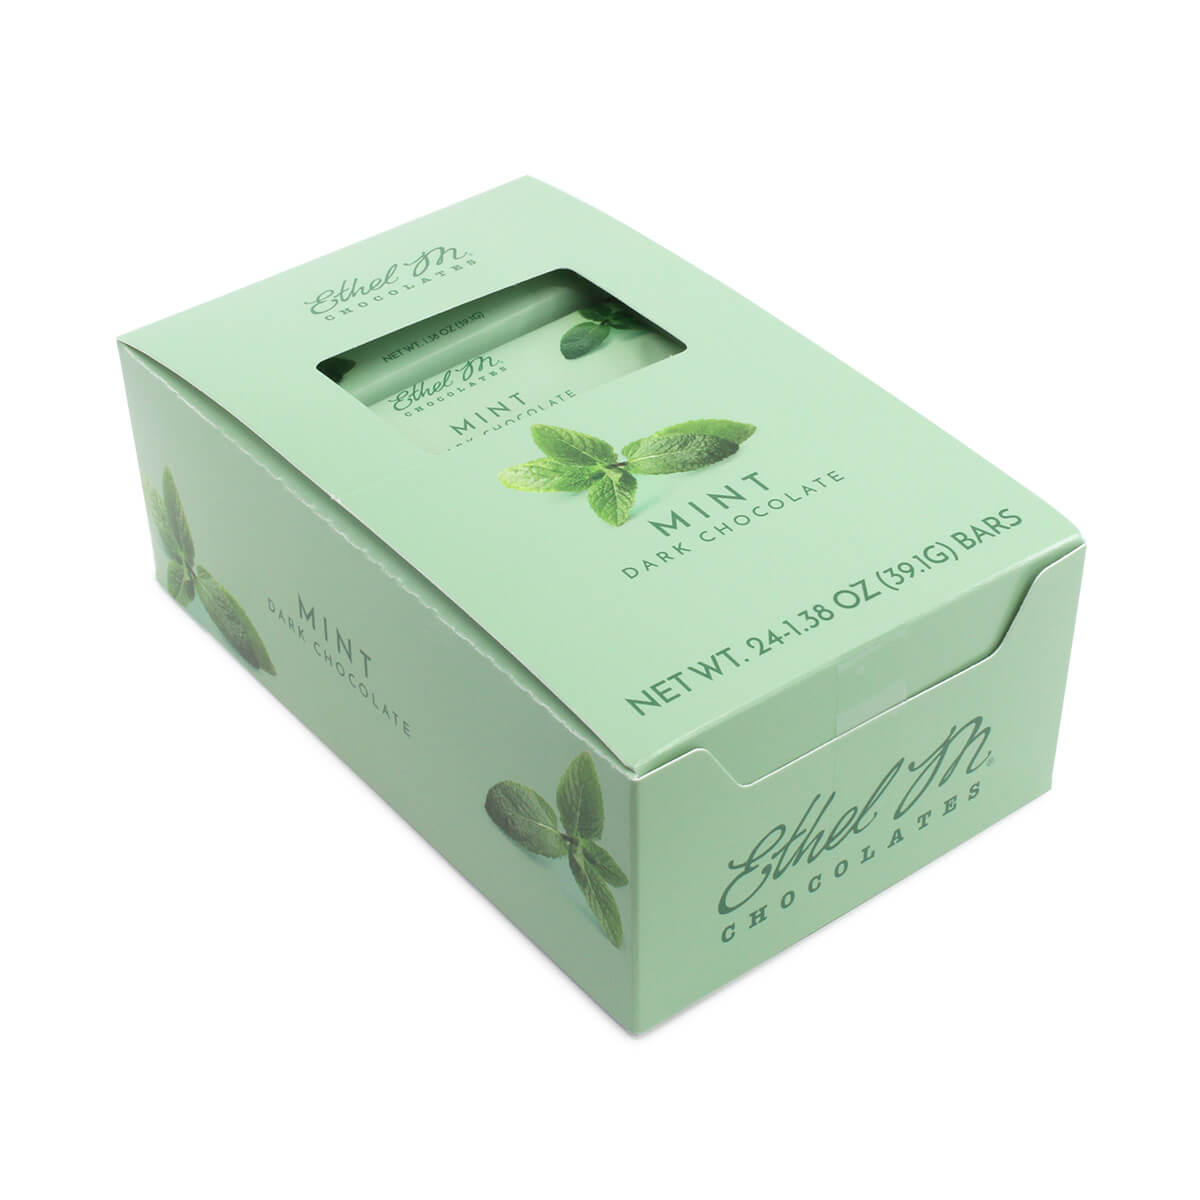 Ethel M Chocolates Sensational blend of Complex Dark Chocolate and Refreshing  Mint in box of 24.